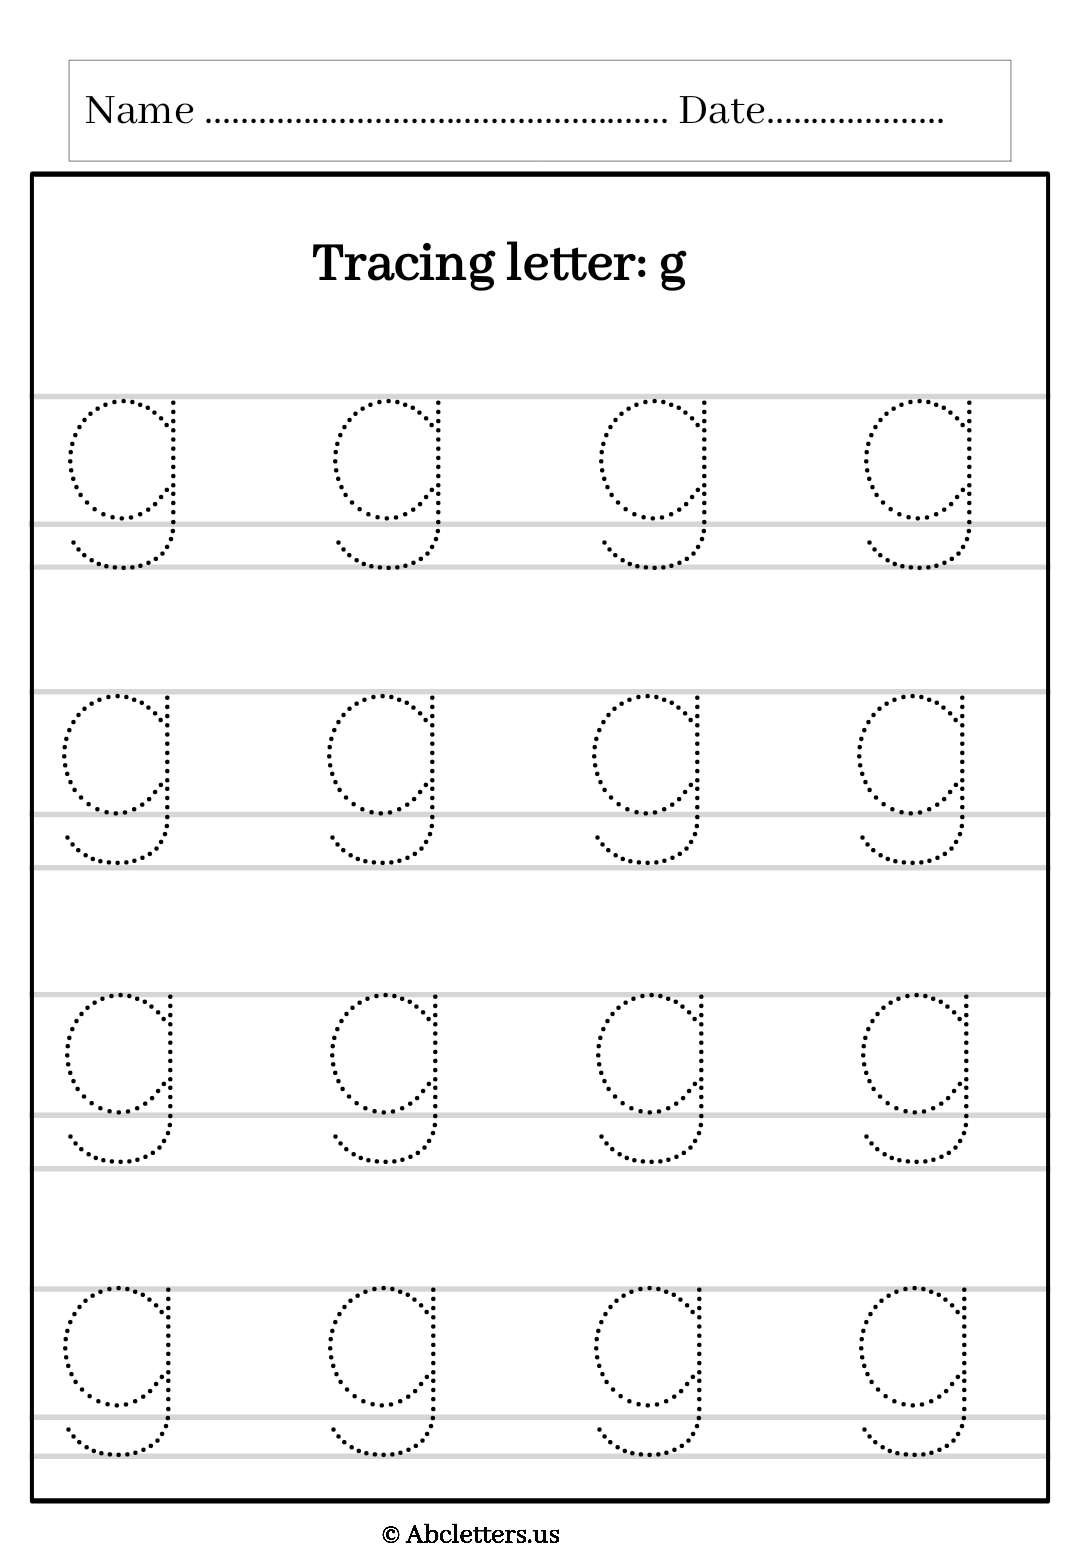 Tracing letter lowercase g with 3 lines